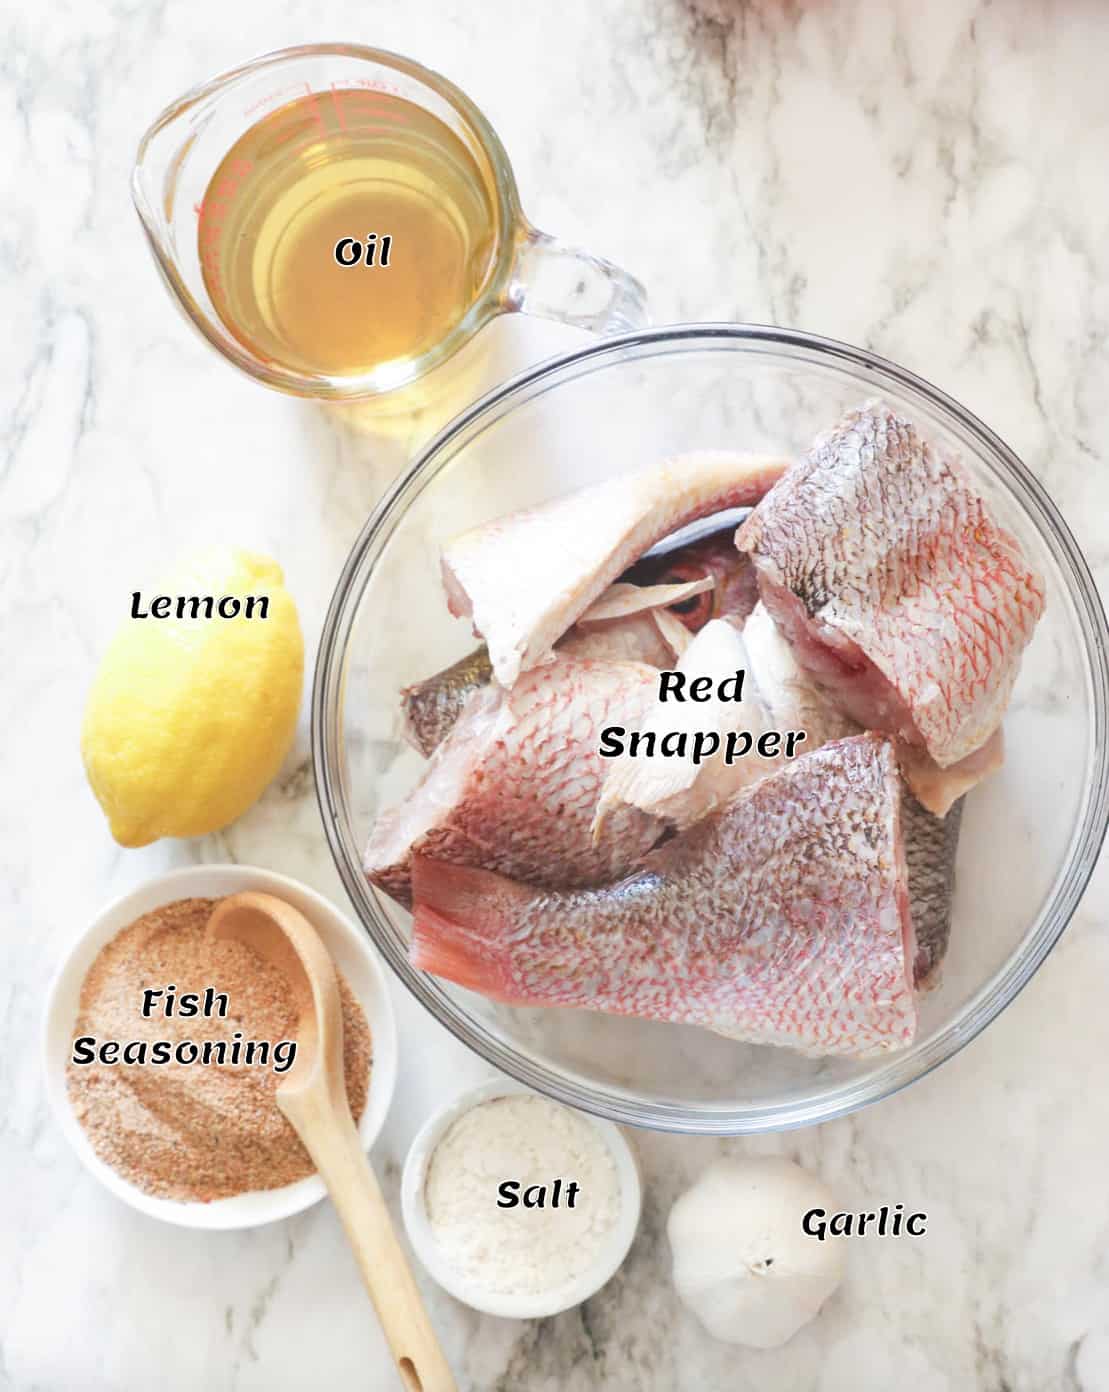 What you need to fry red snapper